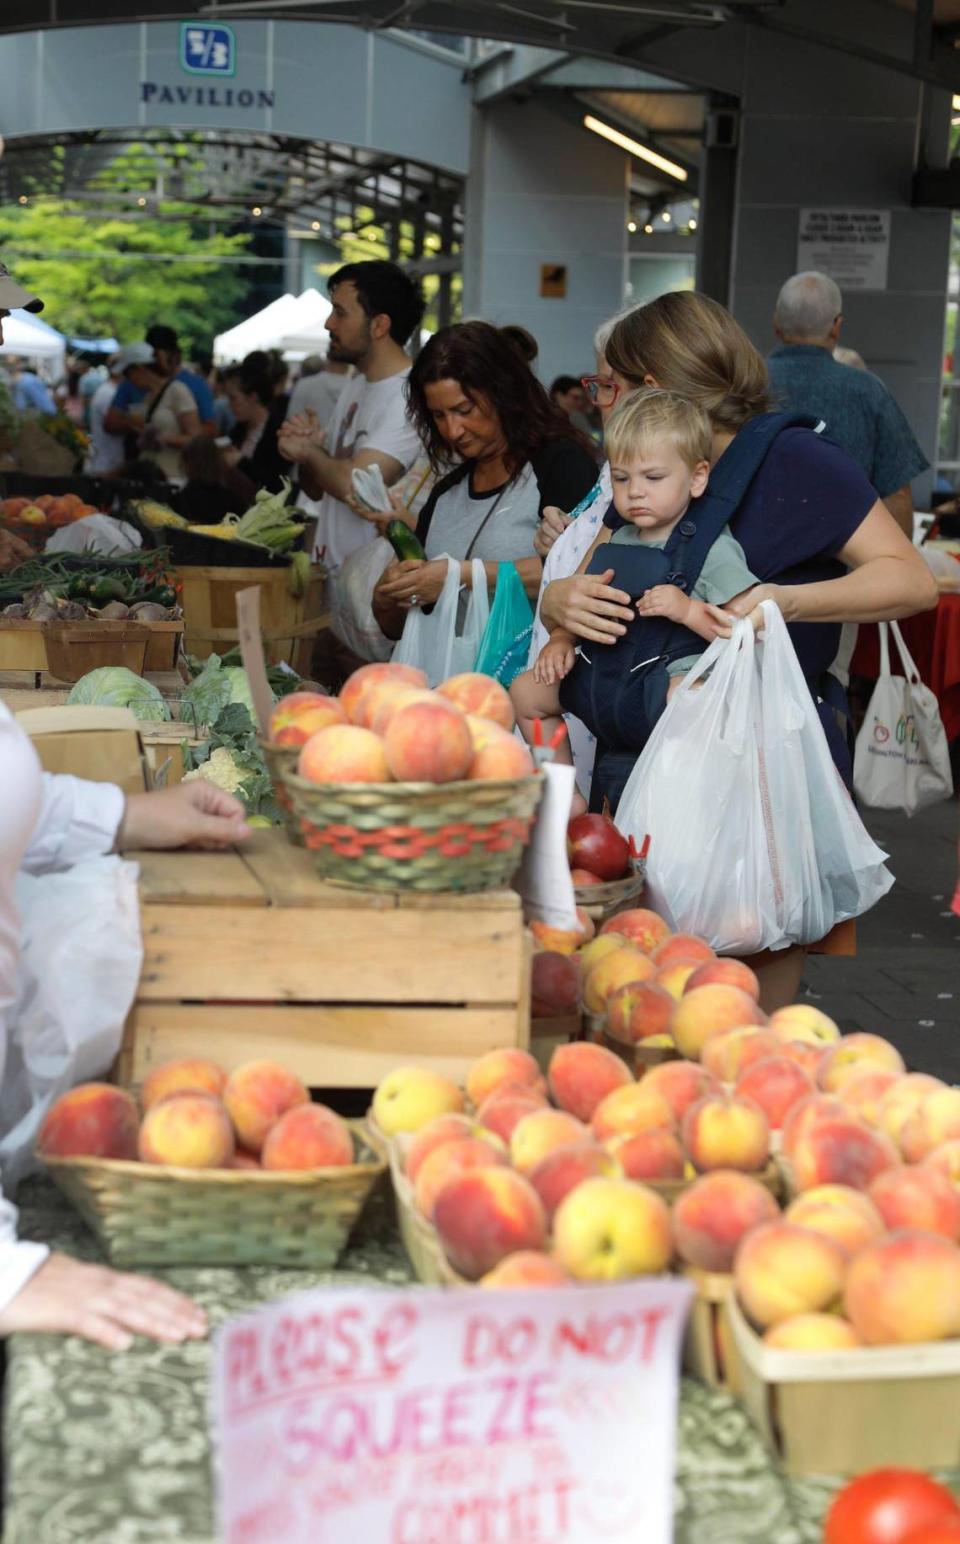 Customers at the Lexington Farmers Market look over fresh peaches, which are always a big draw.